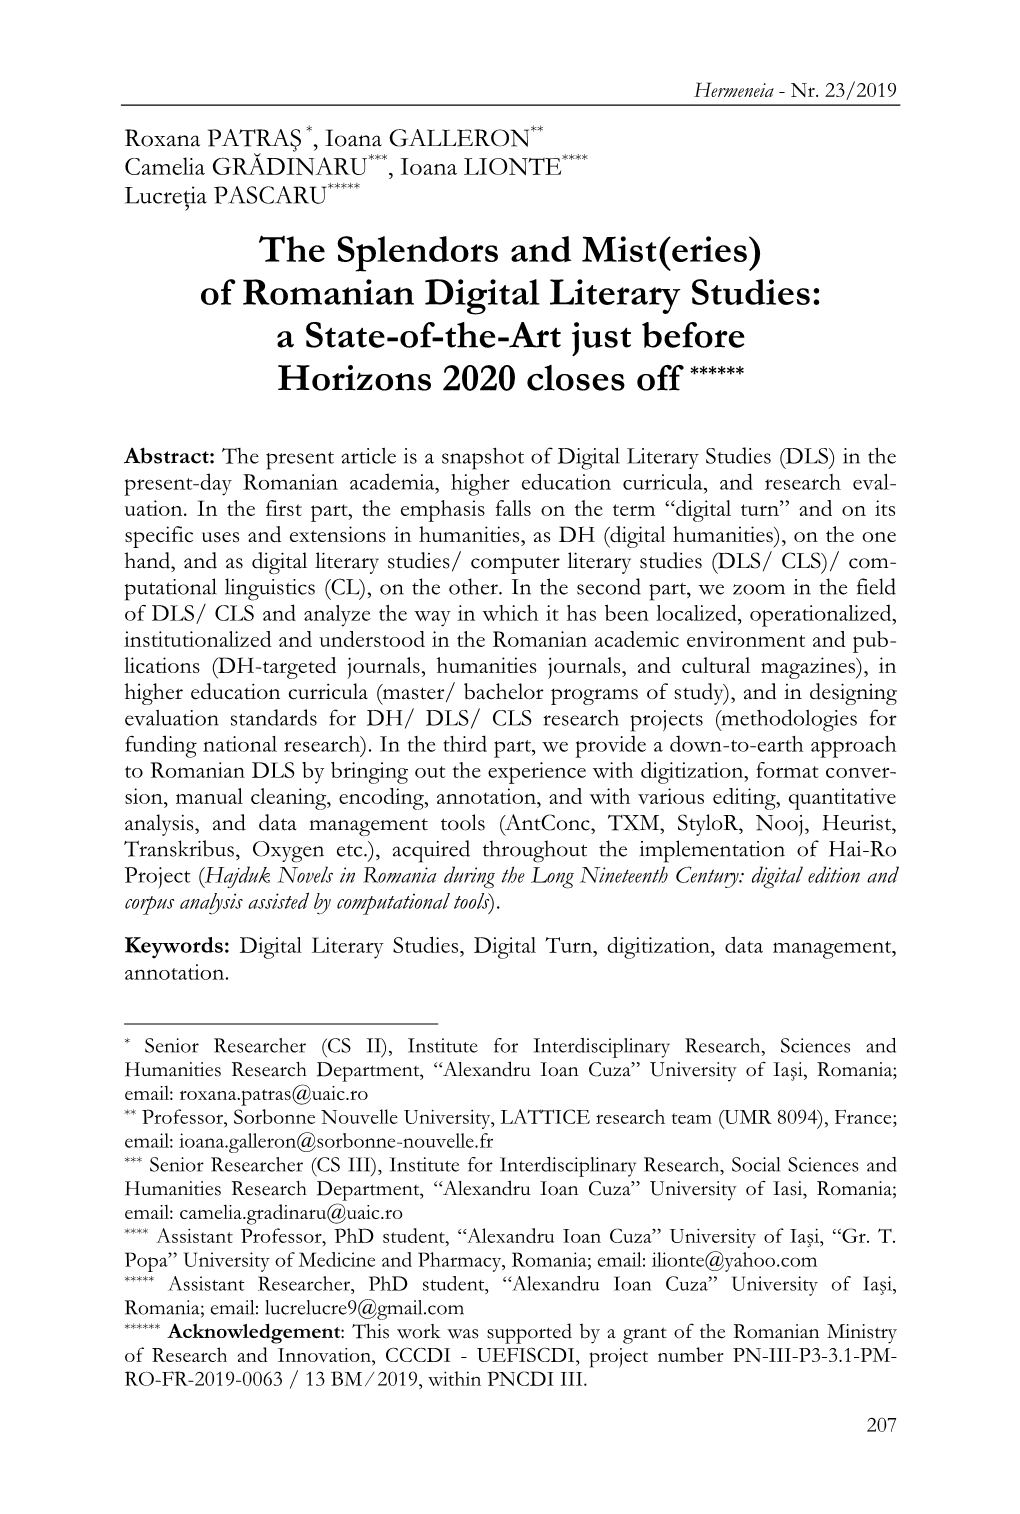 The Splendors and Mist(Eries) of Romanian Digital Literary Studies: a State-Of-The-Art Just Before Horizons 2020 Closes Off ******